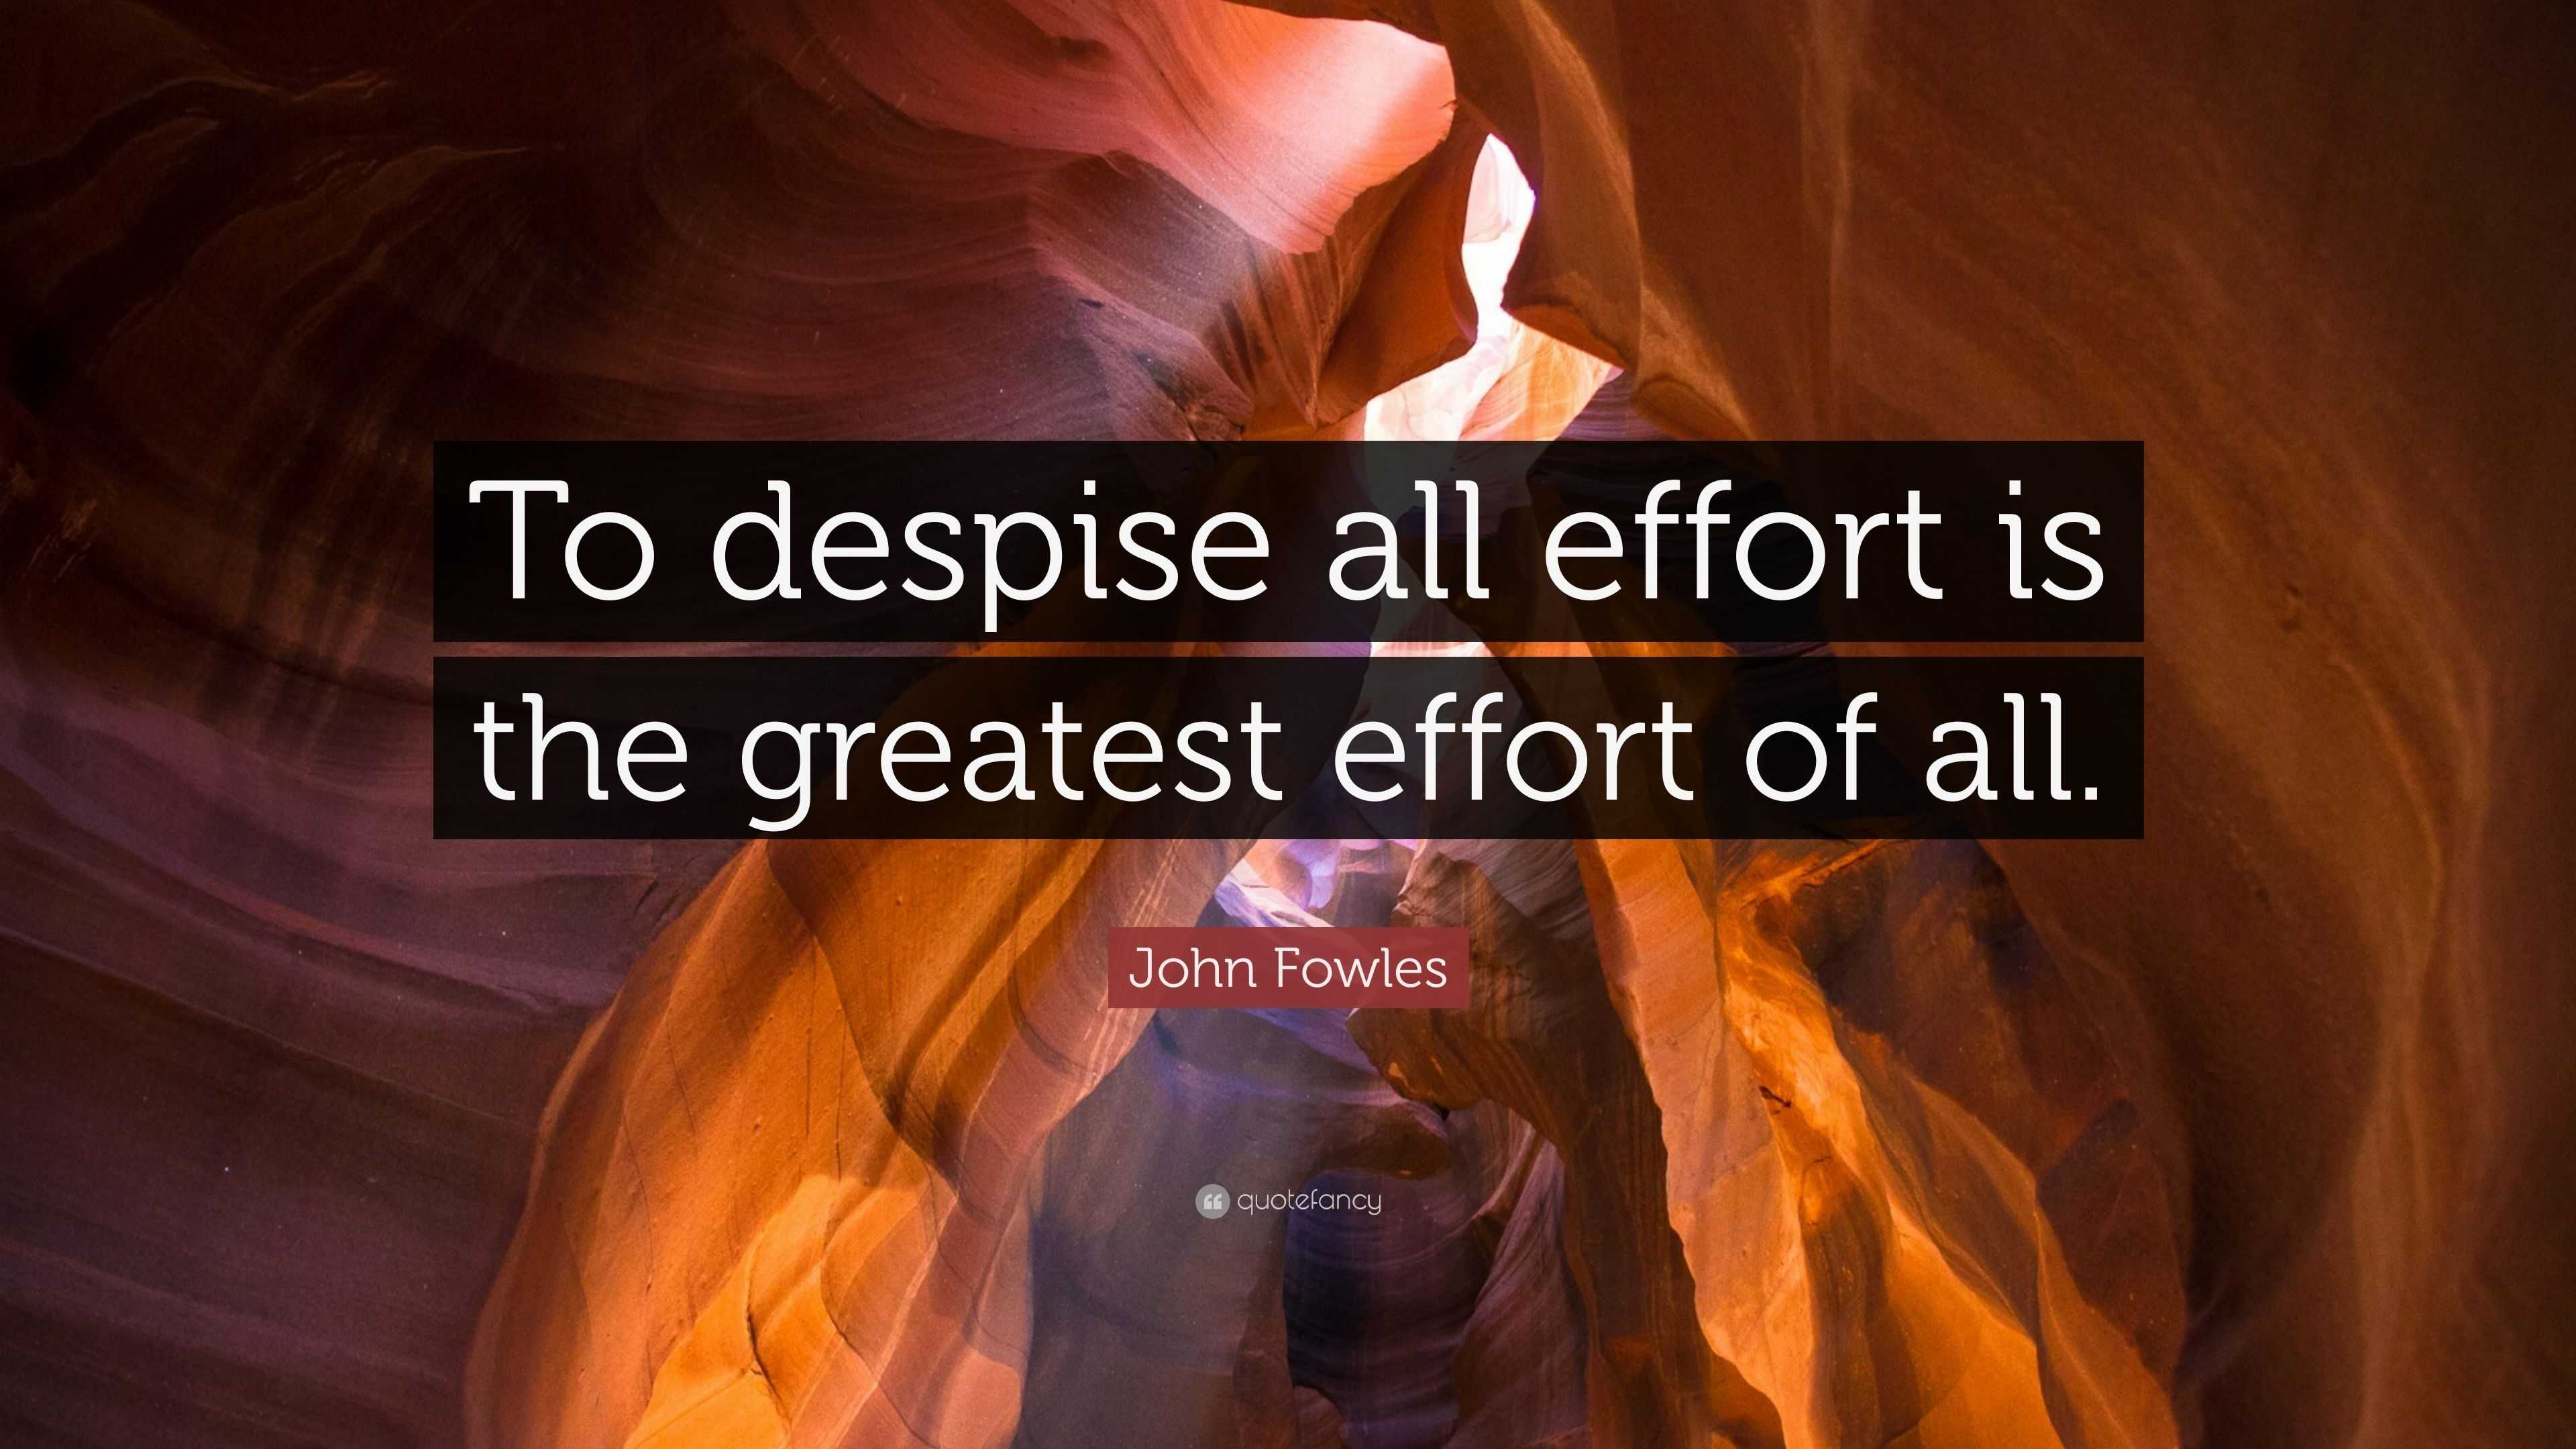 John Fowles Quote: “To despise all effort is the greatest effort of all.”